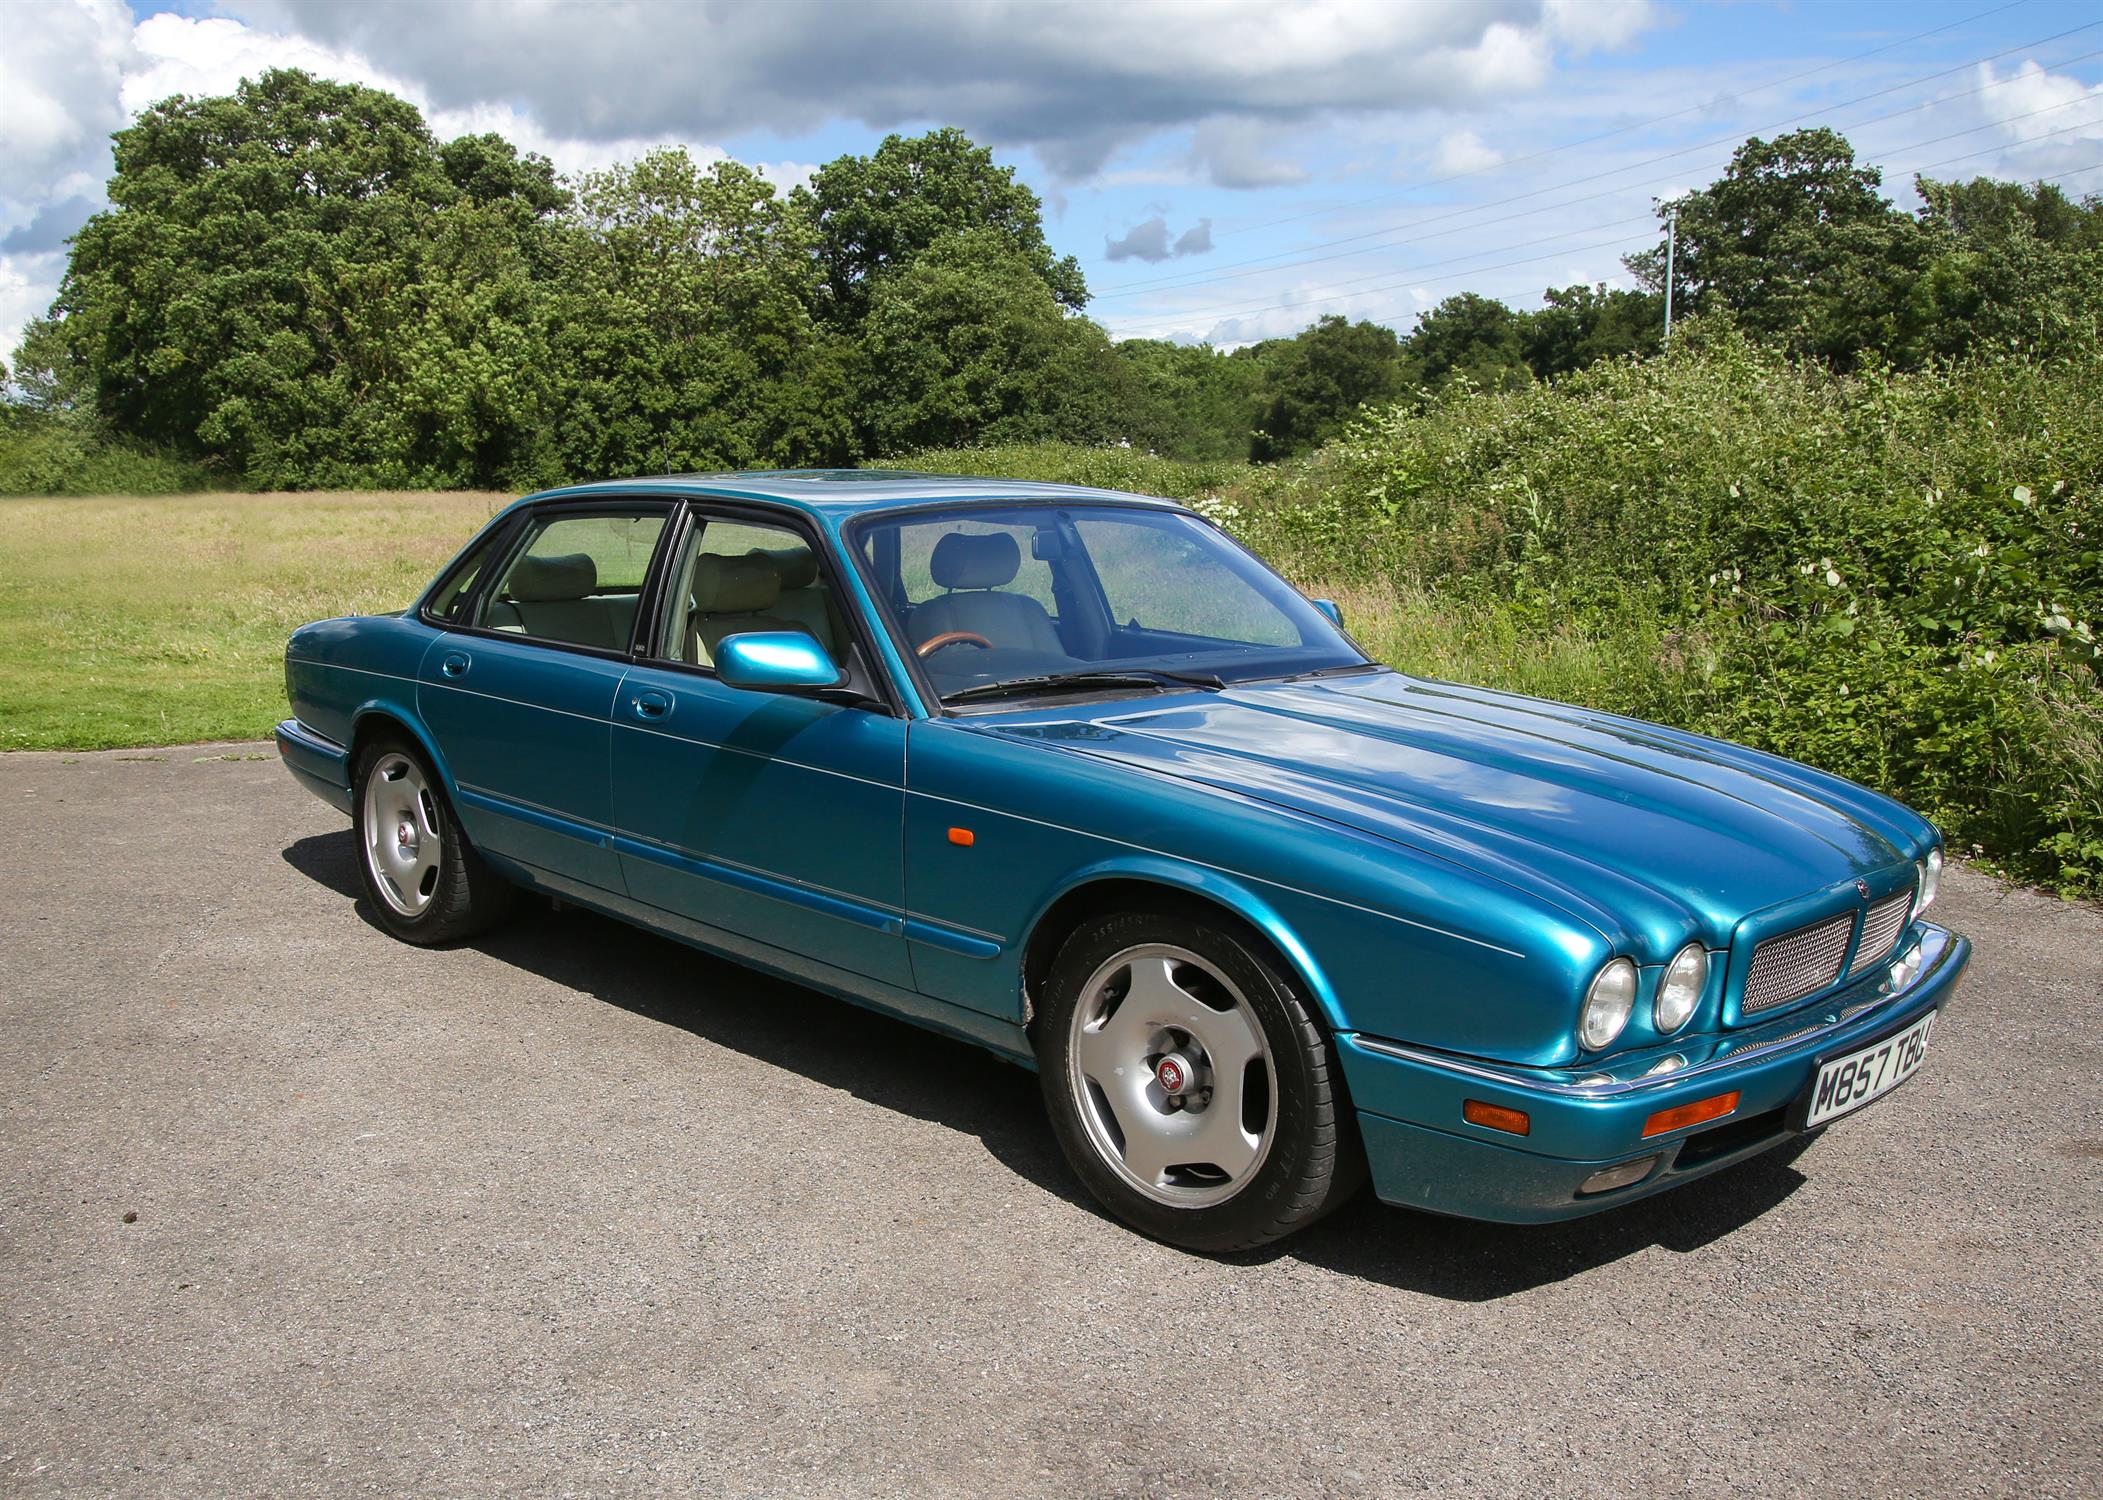 1995 Jaguar XJR Automatic, registration number M857 TBU. - With fitted extras and history file.